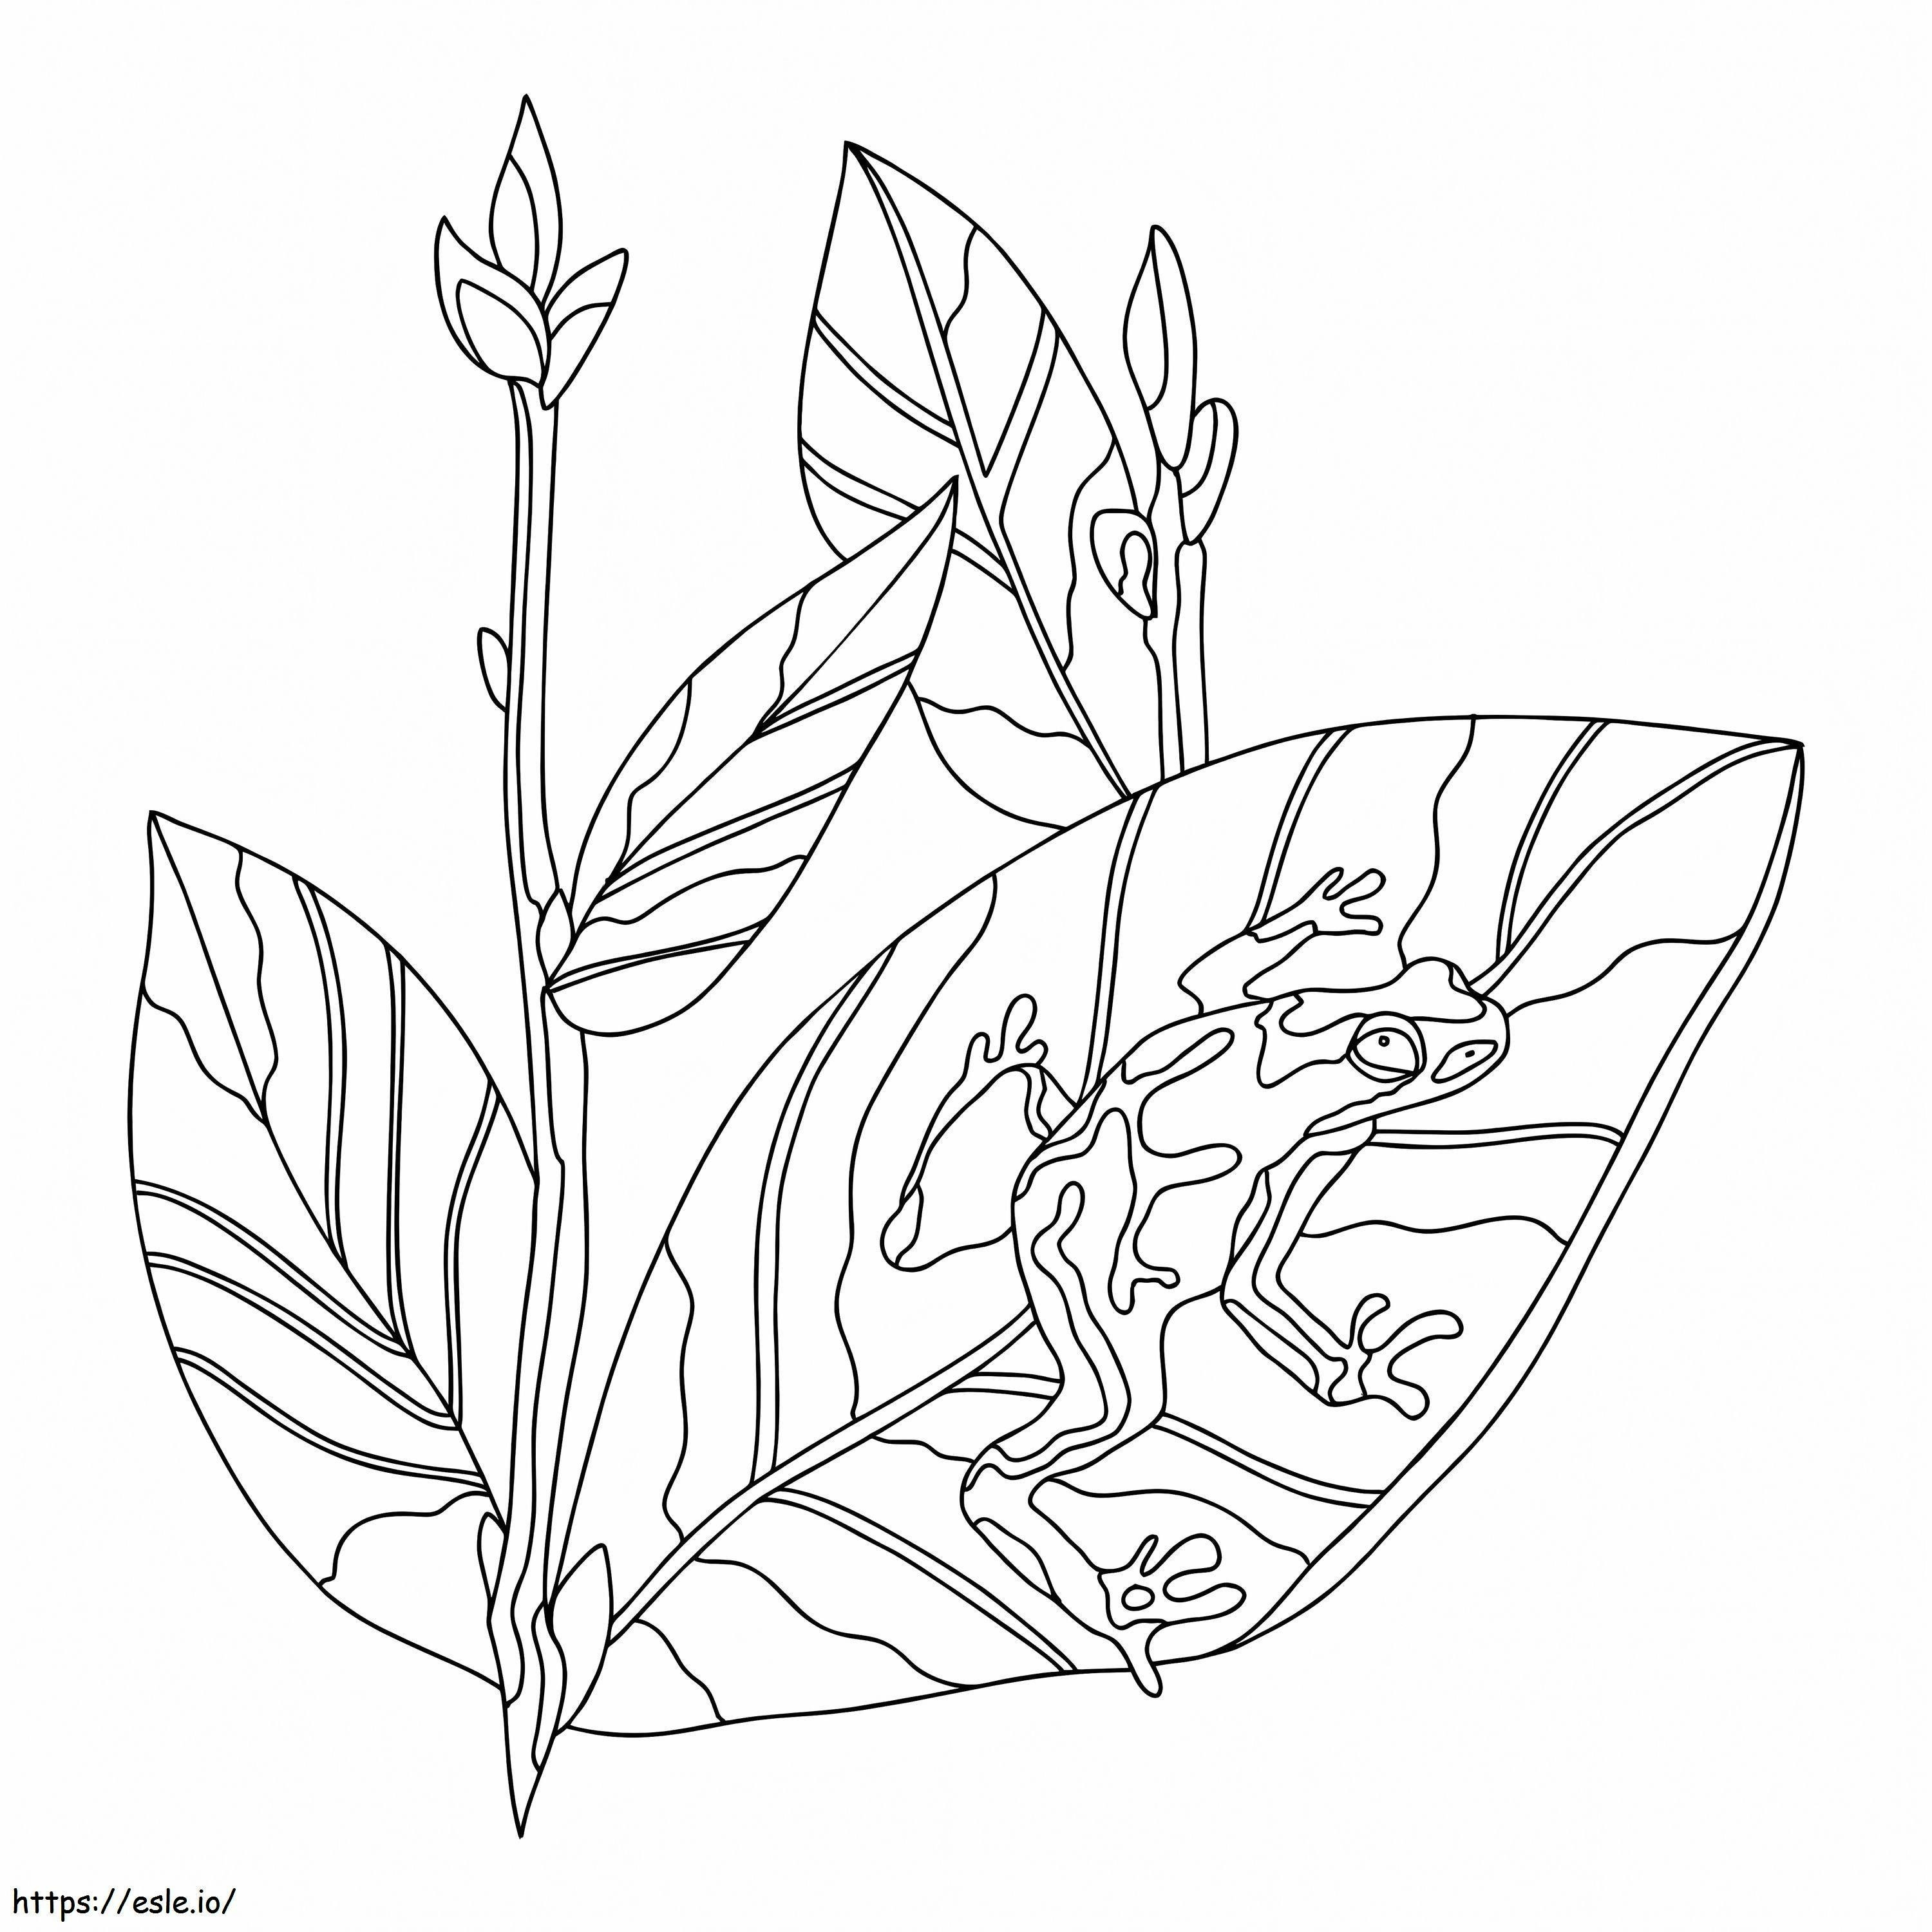 A Frog With Ginger Leaves coloring page